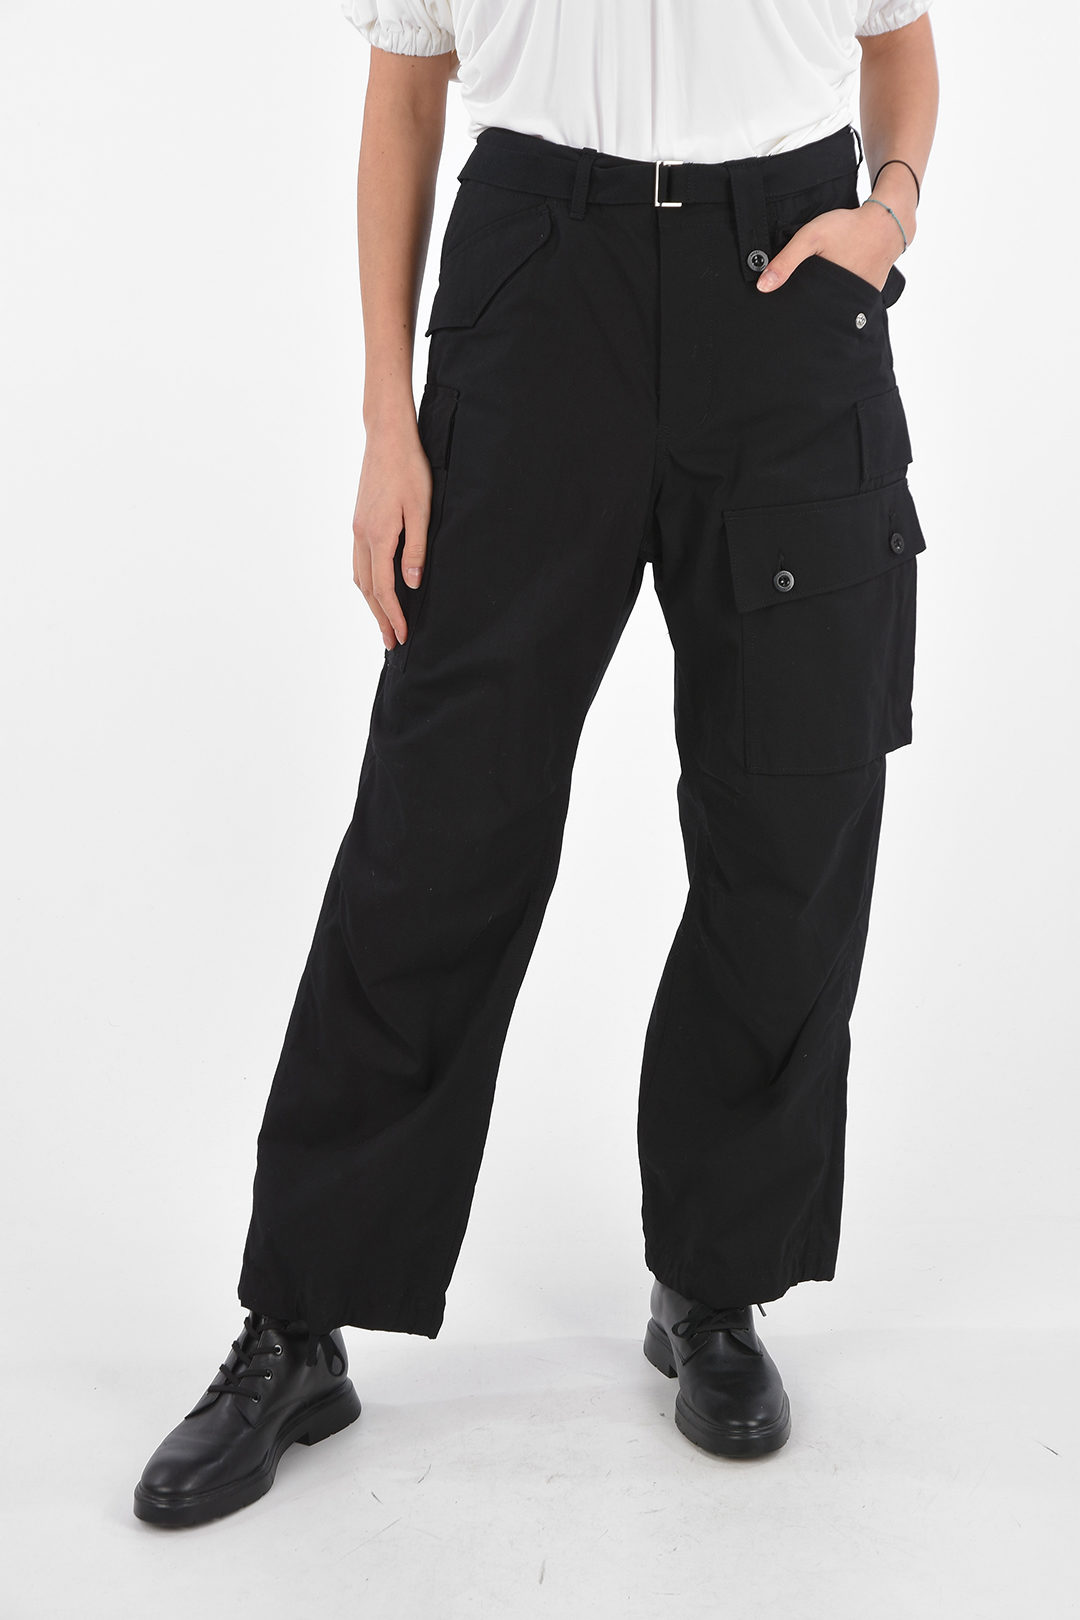 https://data.glamood.com/imgprodotto/cargo-pants-with-belt-and-ankle-drawstrings_1064676_zoom.jpg